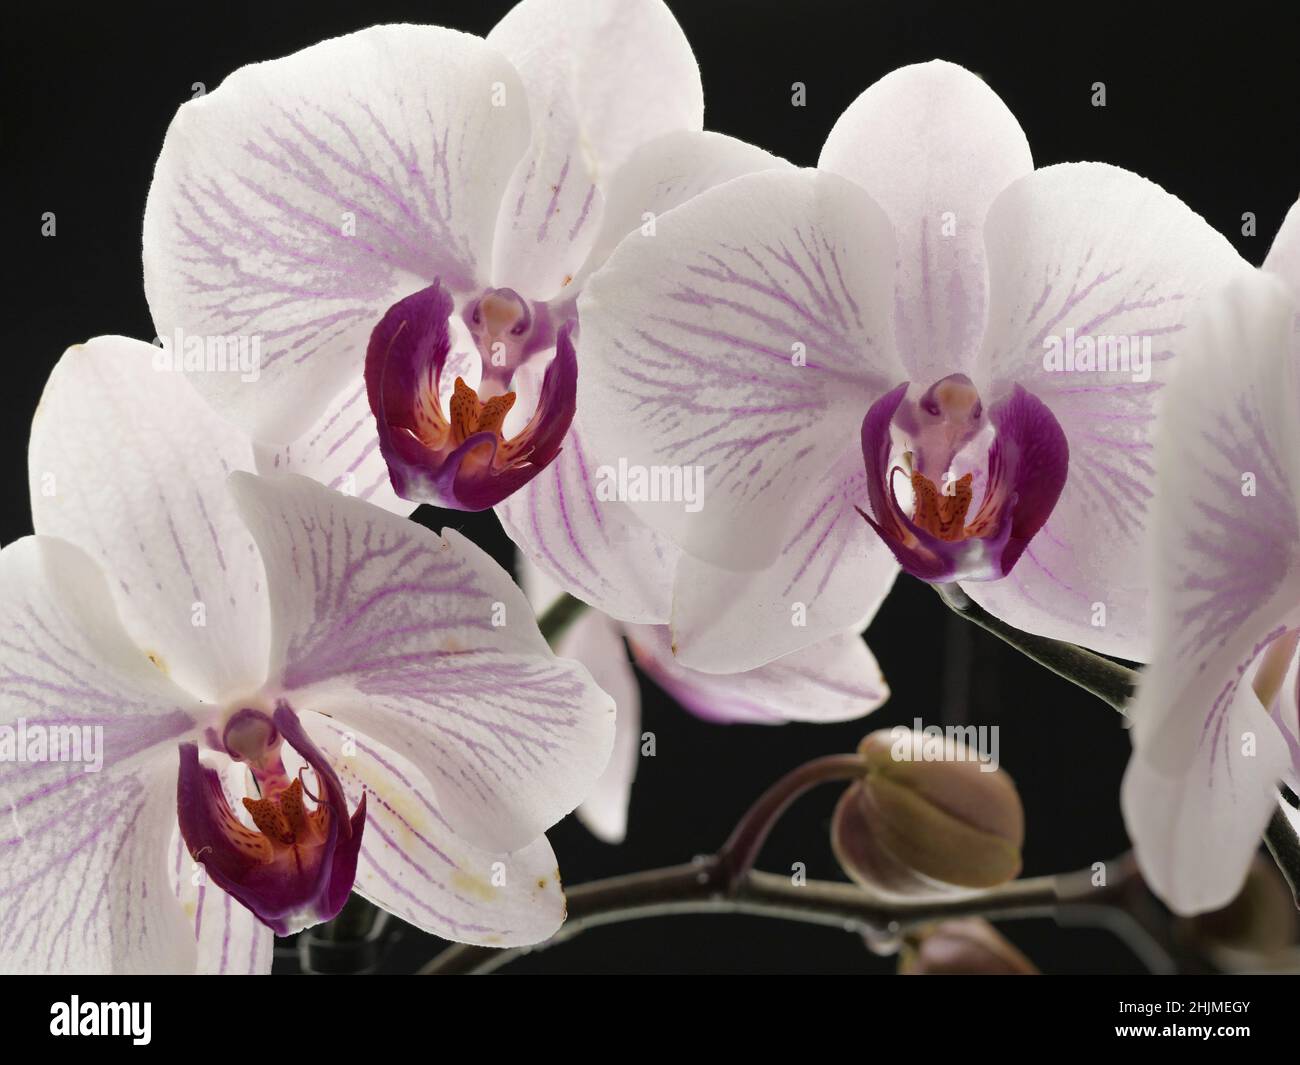 Beautiful white and purple orchid flowers white black background.  Stock Photo